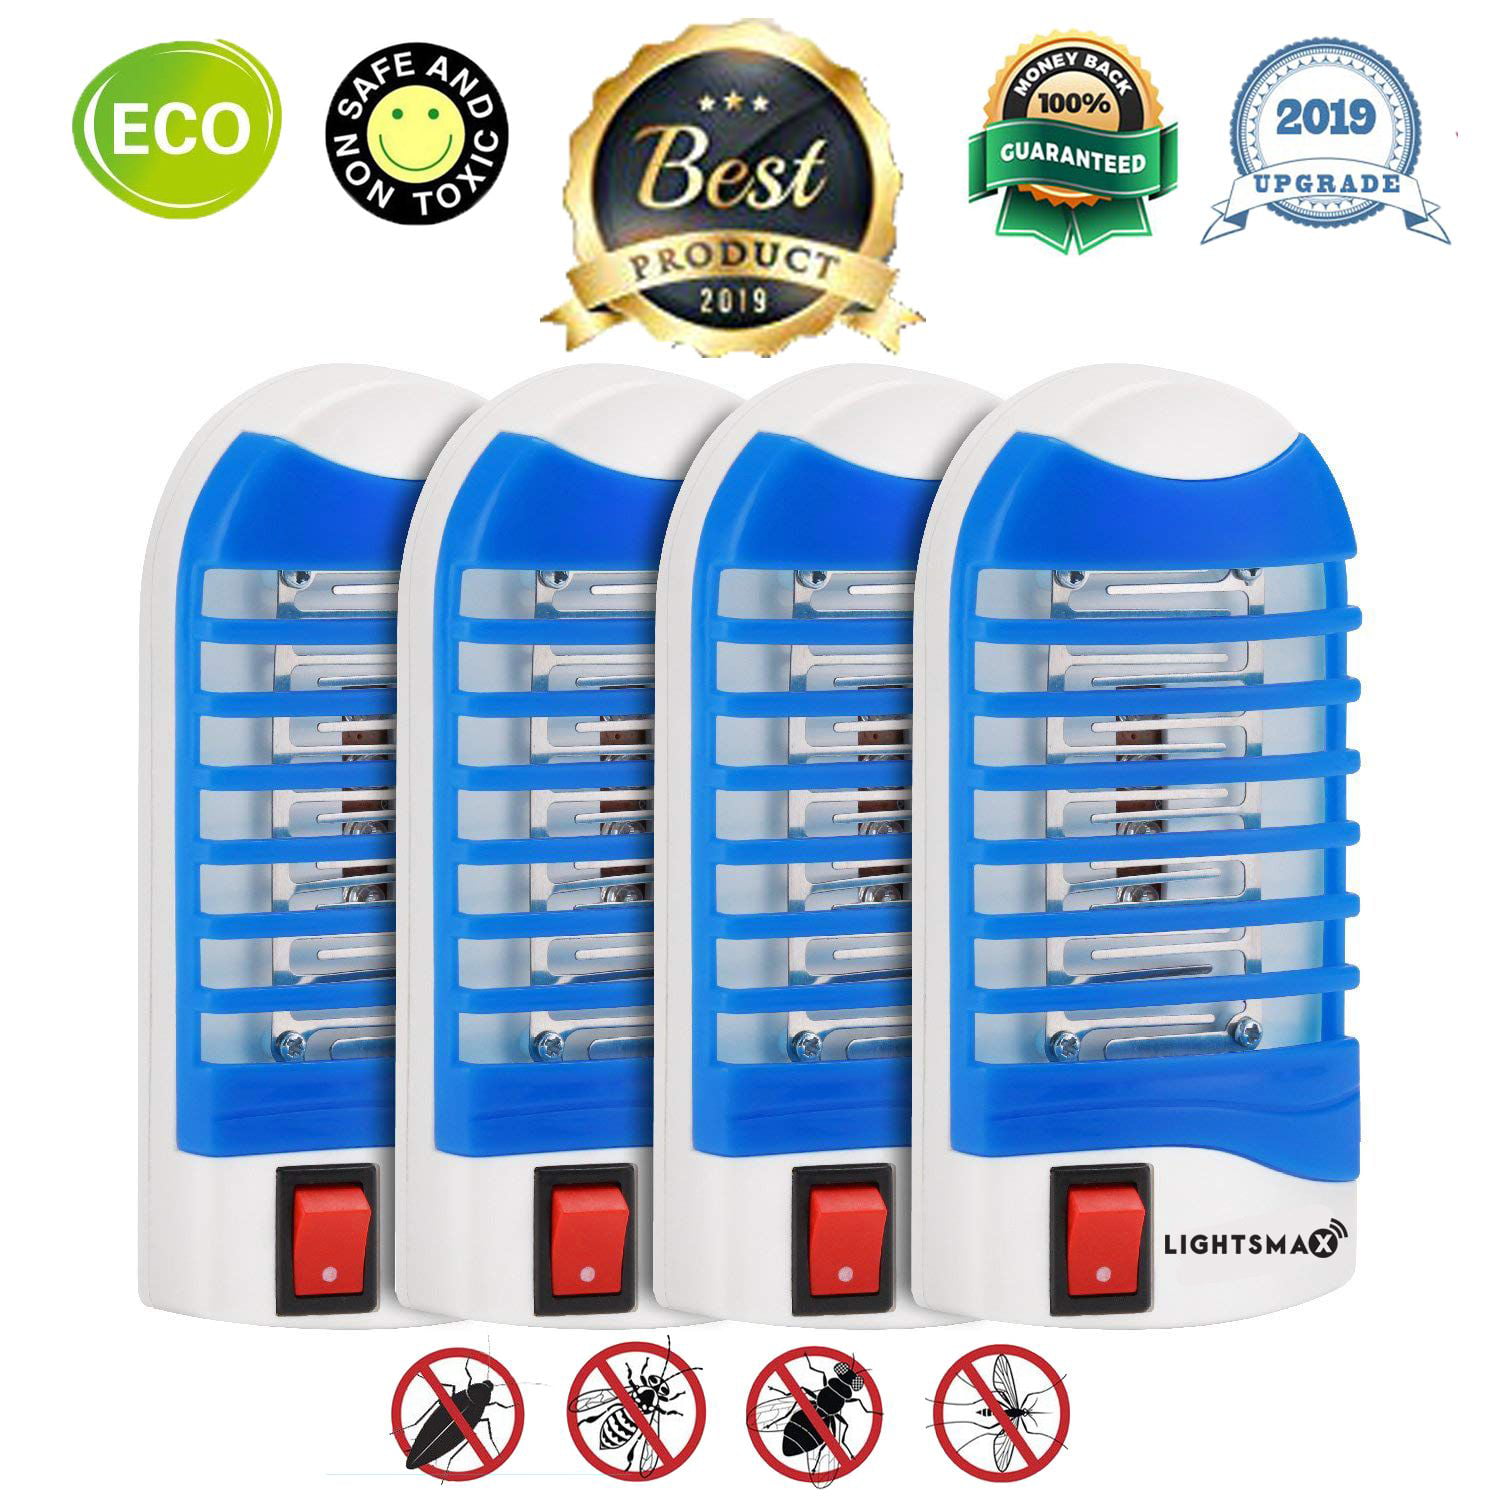 4 Pk Indoor Plug in Mosquito Fly Trap Insect Killer Bug Zapper Bright LED Light 